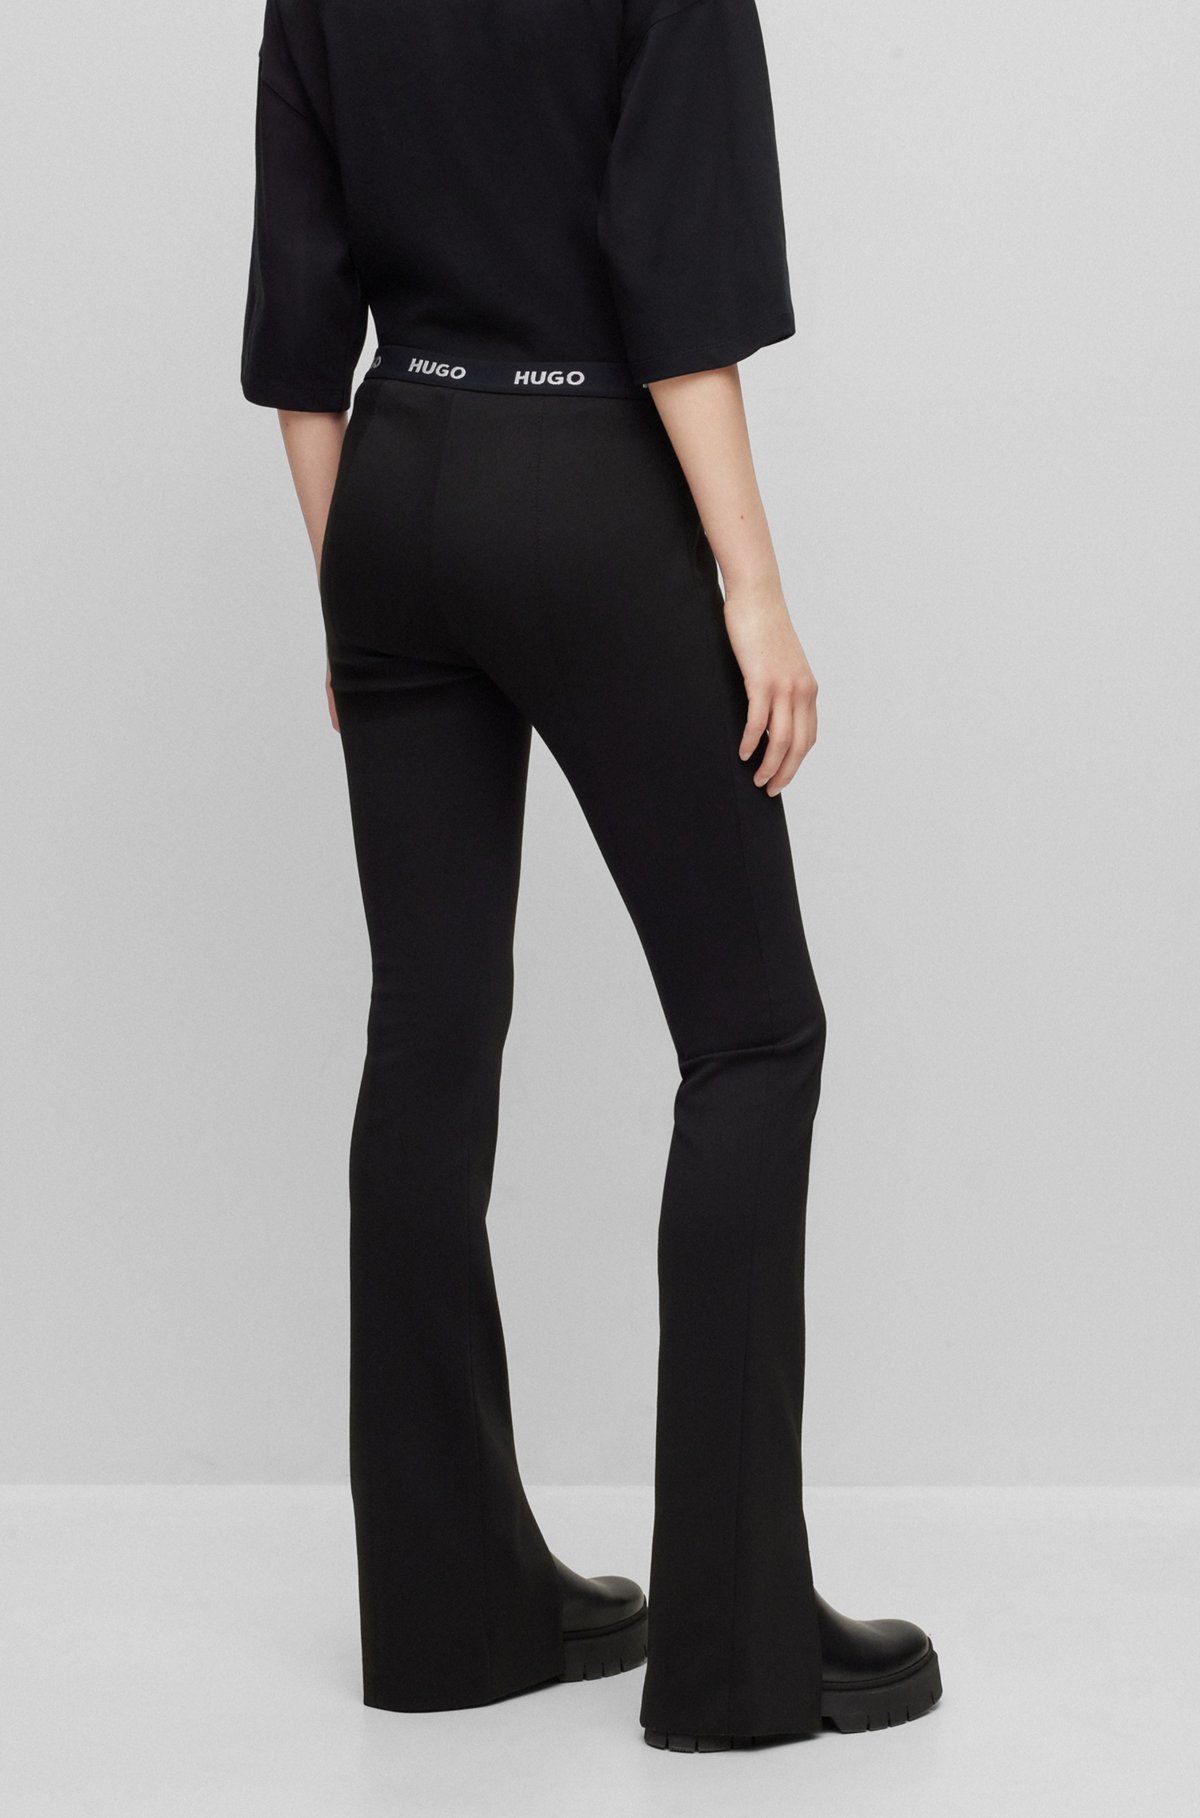 Slim-fit trousers in stretch fabric with slit hems, Black